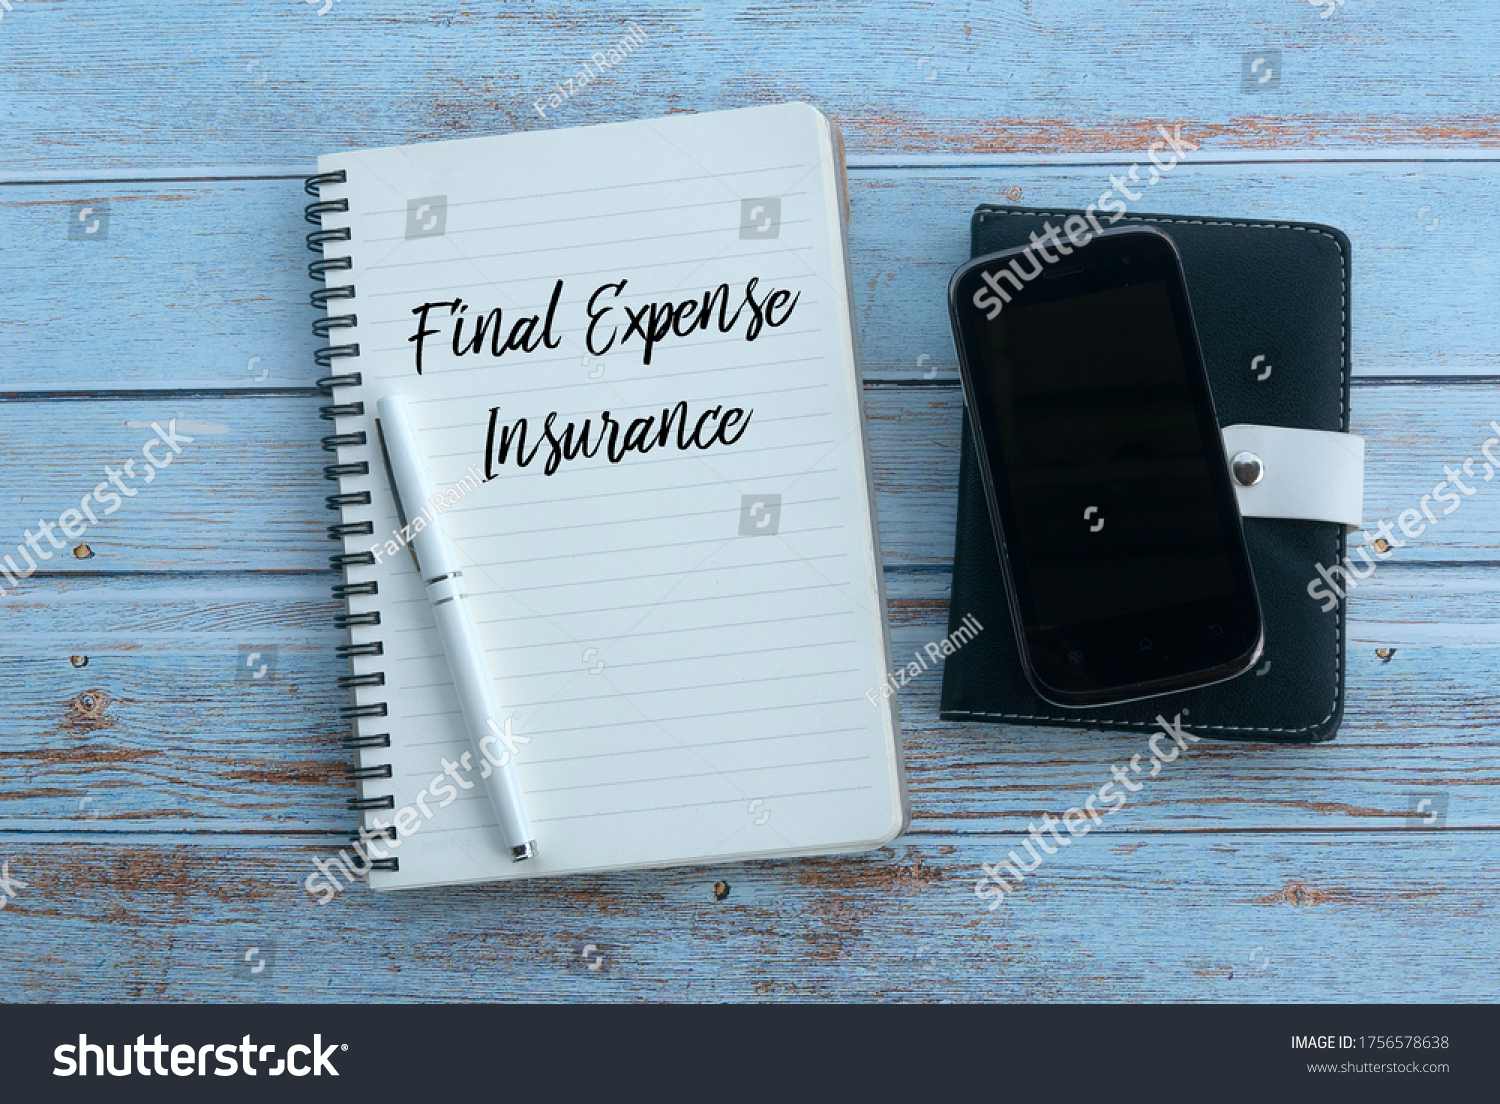 Top view of mobile phone,pen and notebook written with Final Expense Insurance on wooden background. #1756578638